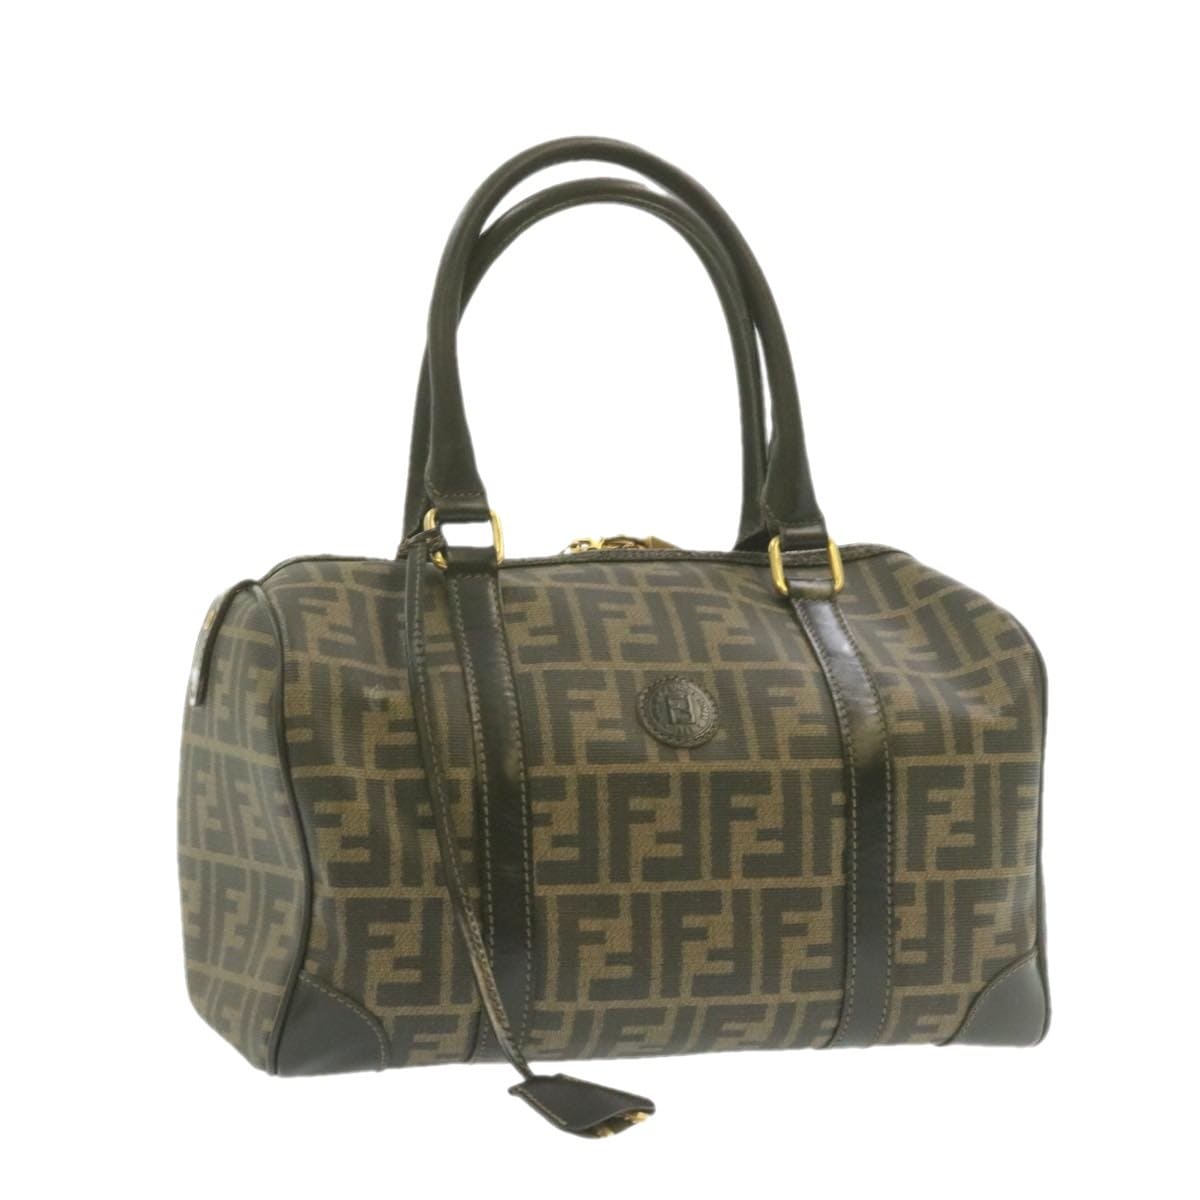 Buy Pre Loved Fendi Zucca Boston Bag AWL1088 Products Online - Luxury ...